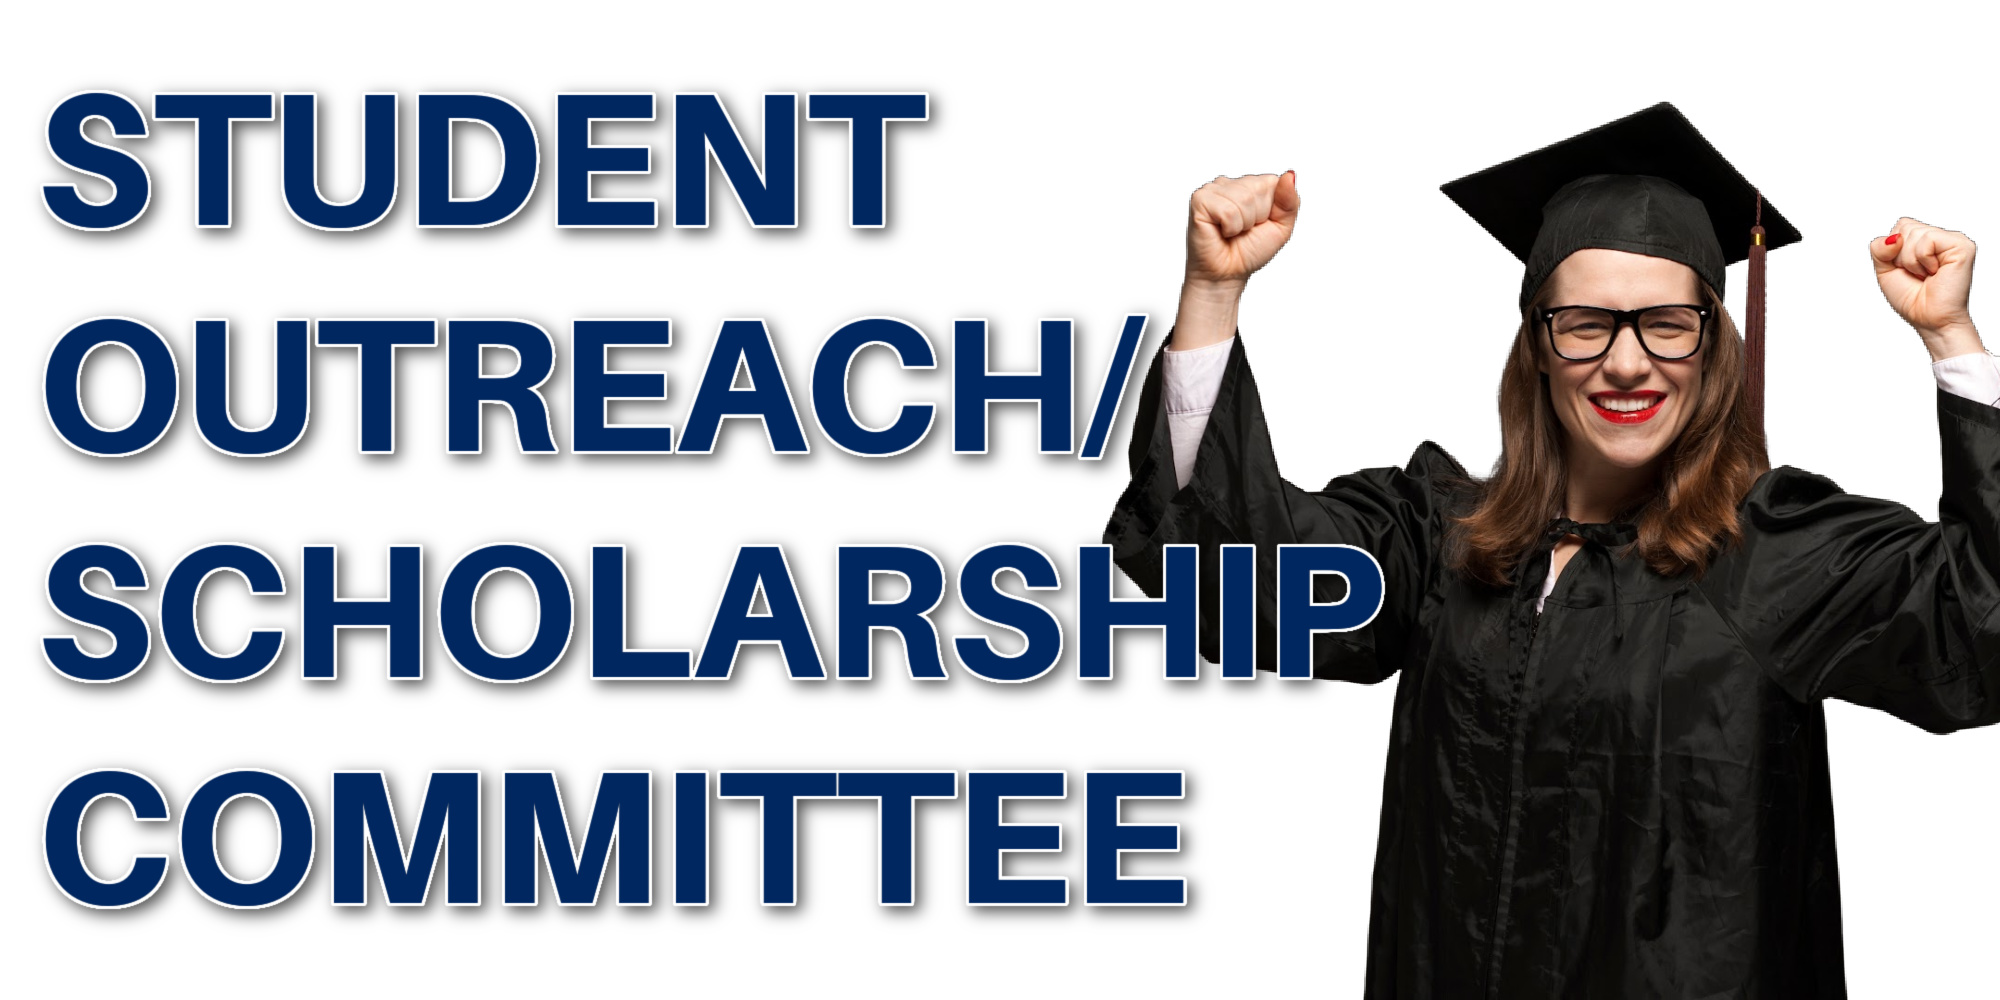 Scholarship and Student Outreach Committee